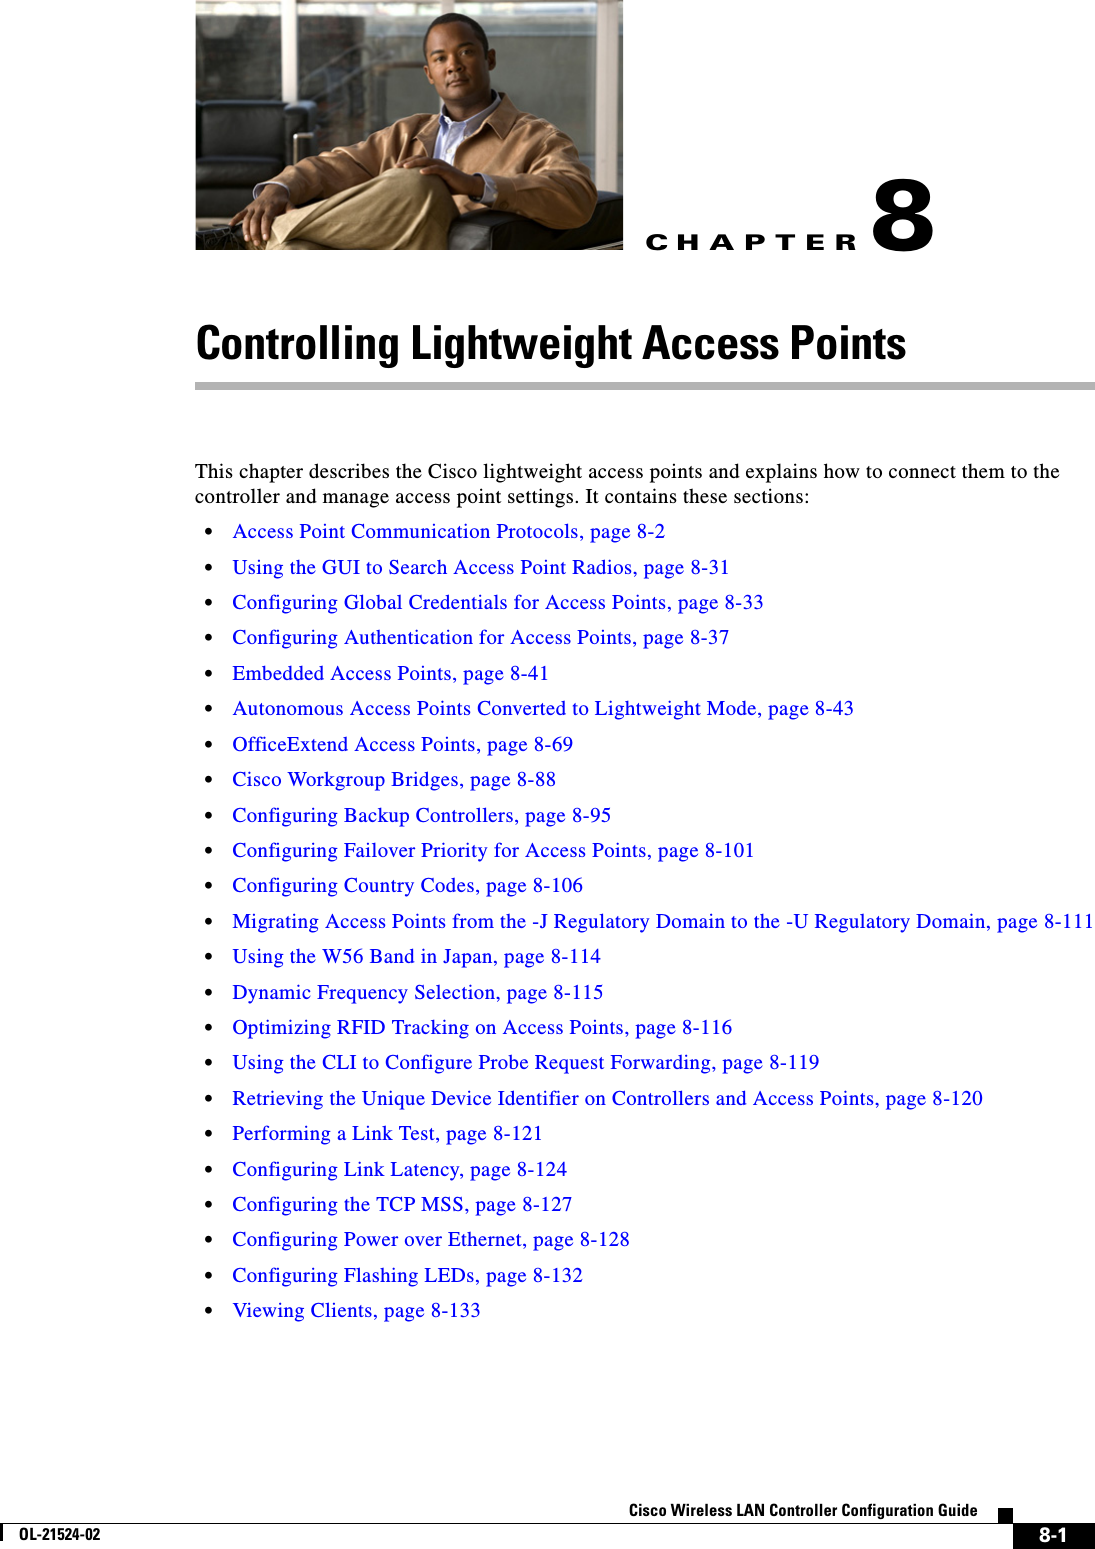 CHAPTER8-1Cisco Wireless LAN Controller Configuration GuideOL-21524-028 Controlling Lightweight Access PointsThis chapter describes the Cisco lightweight access points and explains how to connect them to the controller and manage access point settings. It contains these sections:  • Access Point Communication Protocols, page 8-2  • Using the GUI to Search Access Point Radios, page 8-31  • Configuring Global Credentials for Access Points, page 8-33  • Configuring Authentication for Access Points, page 8-37  • Embedded Access Points, page 8-41  • Autonomous Access Points Converted to Lightweight Mode, page 8-43  • OfficeExtend Access Points, page 8-69  • Cisco Workgroup Bridges, page 8-88  • Configuring Backup Controllers, page 8-95  • Configuring Failover Priority for Access Points, page 8-101  • Configuring Country Codes, page 8-106  • Migrating Access Points from the -J Regulatory Domain to the -U Regulatory Domain, page 8-111  • Using the W56 Band in Japan, page 8-114  • Dynamic Frequency Selection, page 8-115  • Optimizing RFID Tracking on Access Points, page 8-116  • Using the CLI to Configure Probe Request Forwarding, page 8-119  • Retrieving the Unique Device Identifier on Controllers and Access Points, page 8-120  • Performing a Link Test, page 8-121  • Configuring Link Latency, page 8-124  • Configuring the TCP MSS, page 8-127  • Configuring Power over Ethernet, page 8-128  • Configuring Flashing LEDs, page 8-132  • Viewing Clients, page 8-133